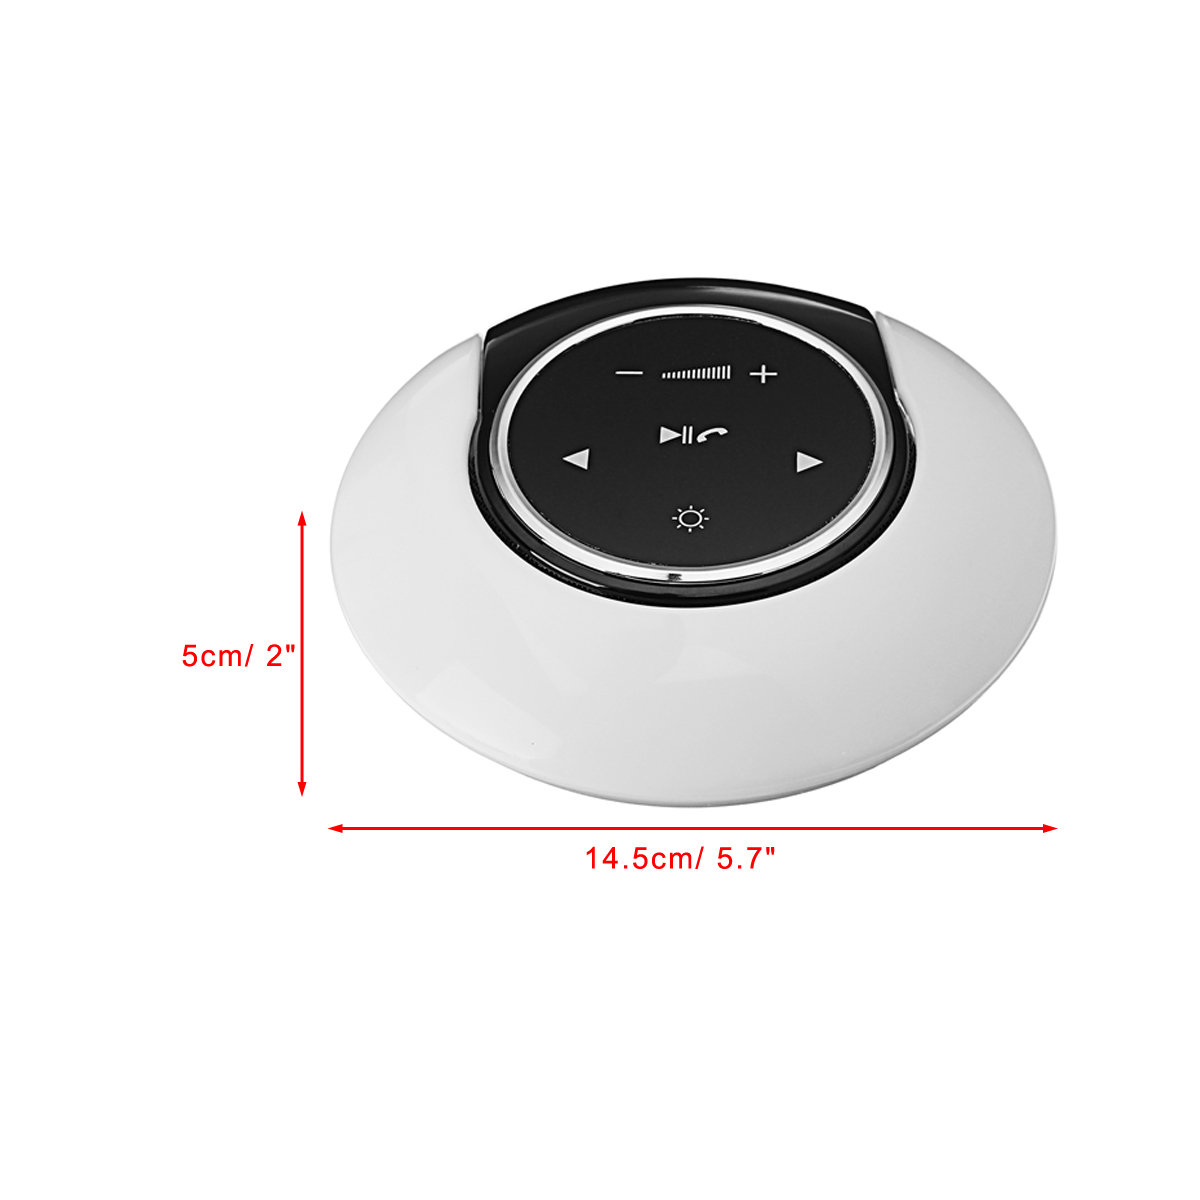 LED-Wireless-bluetooth-Speaker-180-Degree-Rotating-Lamp-Speakers-With-LED-Lights-1316222-11